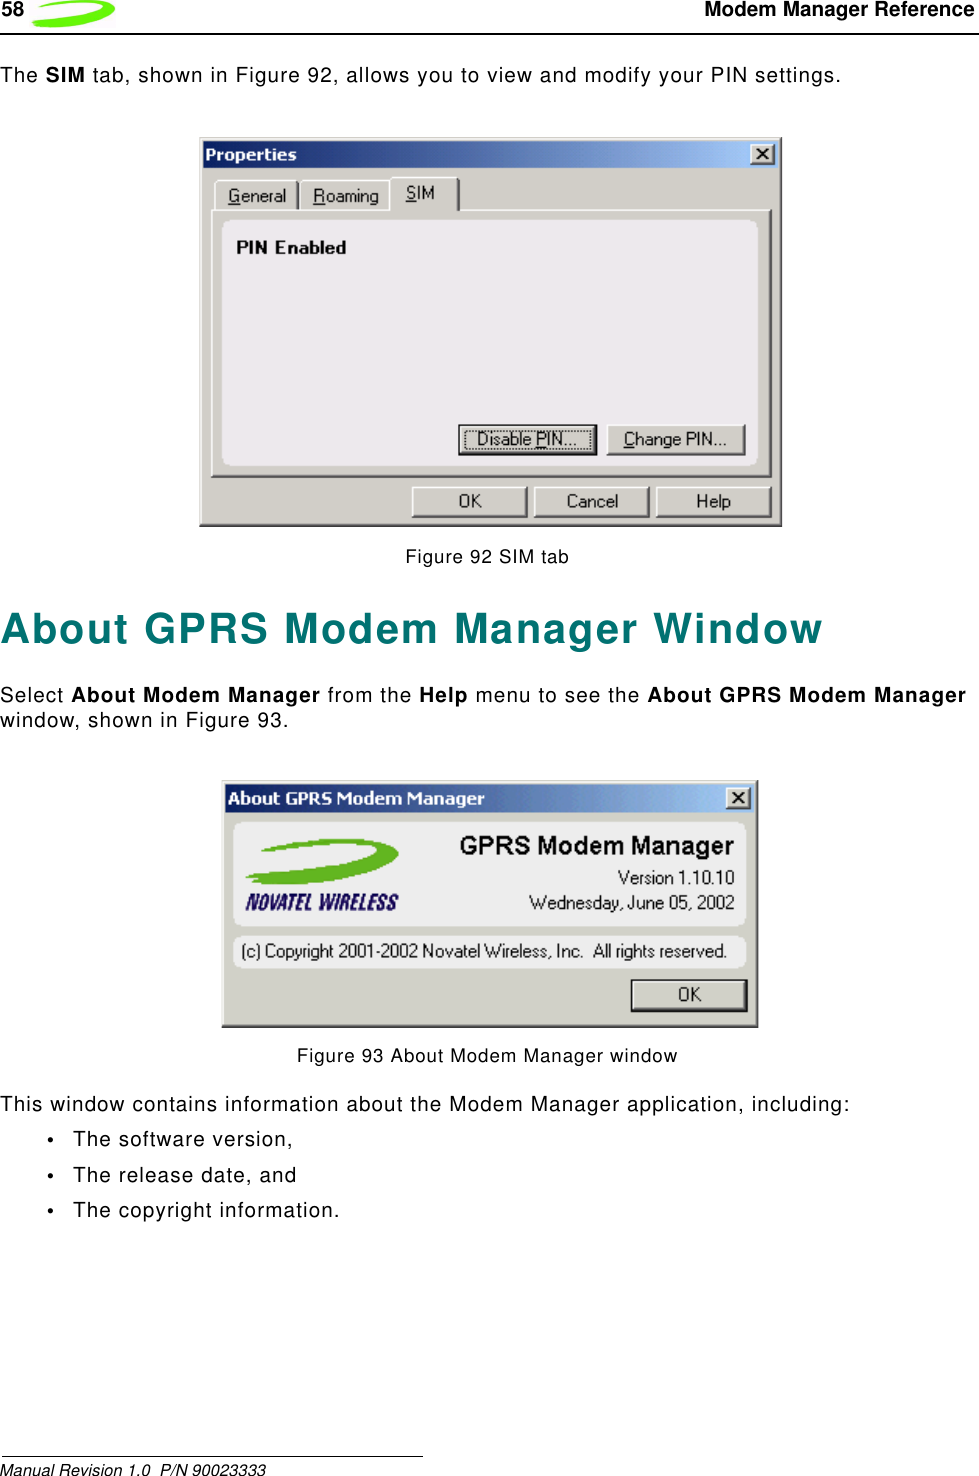 58  Modem Manager ReferenceManual Revision 1.0  P/N 90023333 The SIM tab, shown in Figure 92, allows you to view and modify your PIN settings.Figure 92 SIM tabAbout GPRS Modem Manager WindowSelect About Modem Manager from the Help menu to see the About GPRS Modem Manager window, shown in Figure 93.Figure 93 About Modem Manager windowThis window contains information about the Modem Manager application, including:•The software version,•The release date, and•The copyright information.